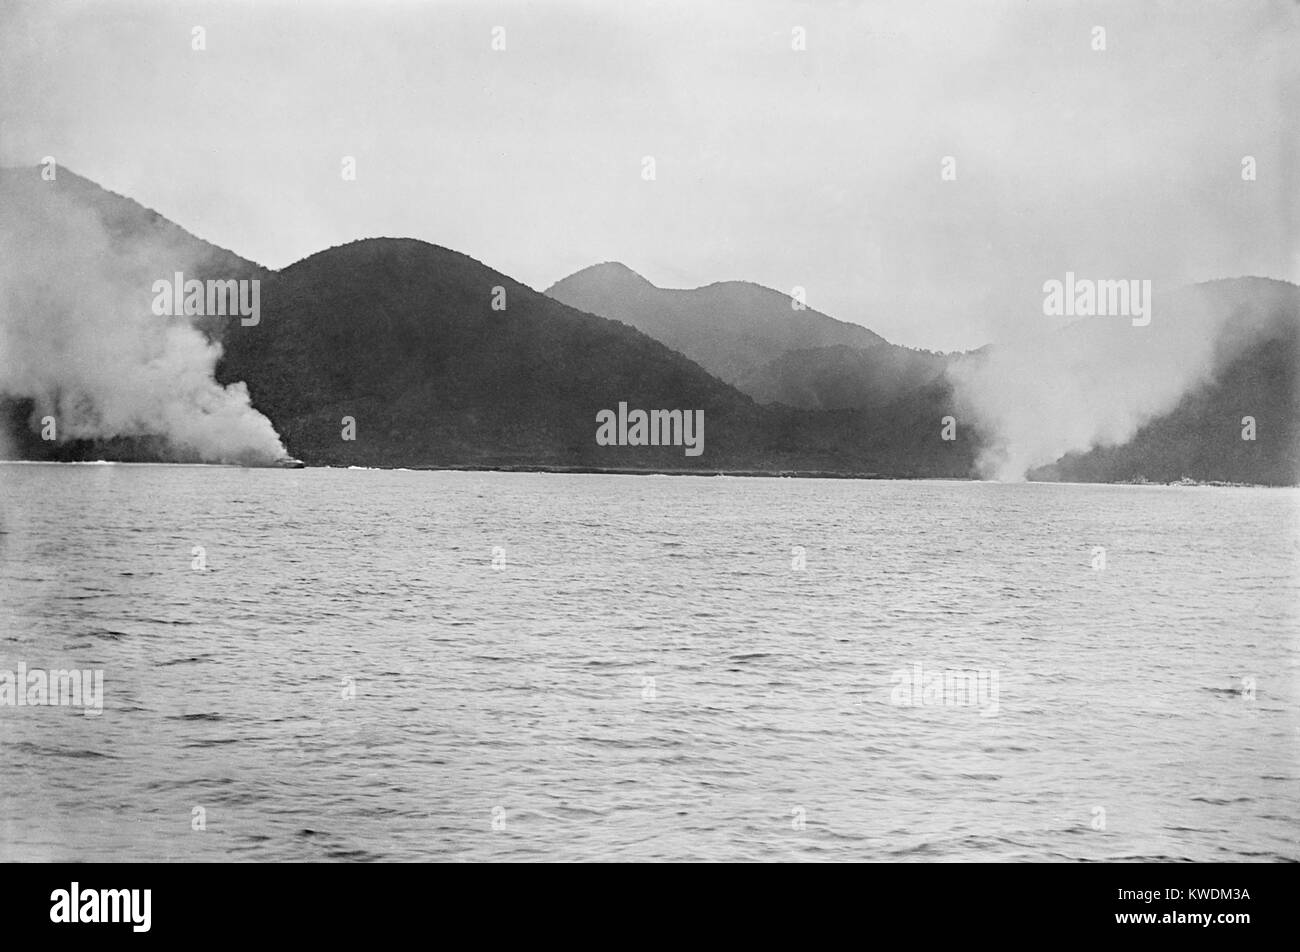 Oquendo and Maria Teresa, aground and burning during the Battle of Santiago, Spanish American War. July 3, 1898. The US destroyed the Spanish fleet, gaining control of the sea, leaving the Spanish troops stranded, and leading to Spanish surrender (BSLOC_2017_10_49) Stock Photo